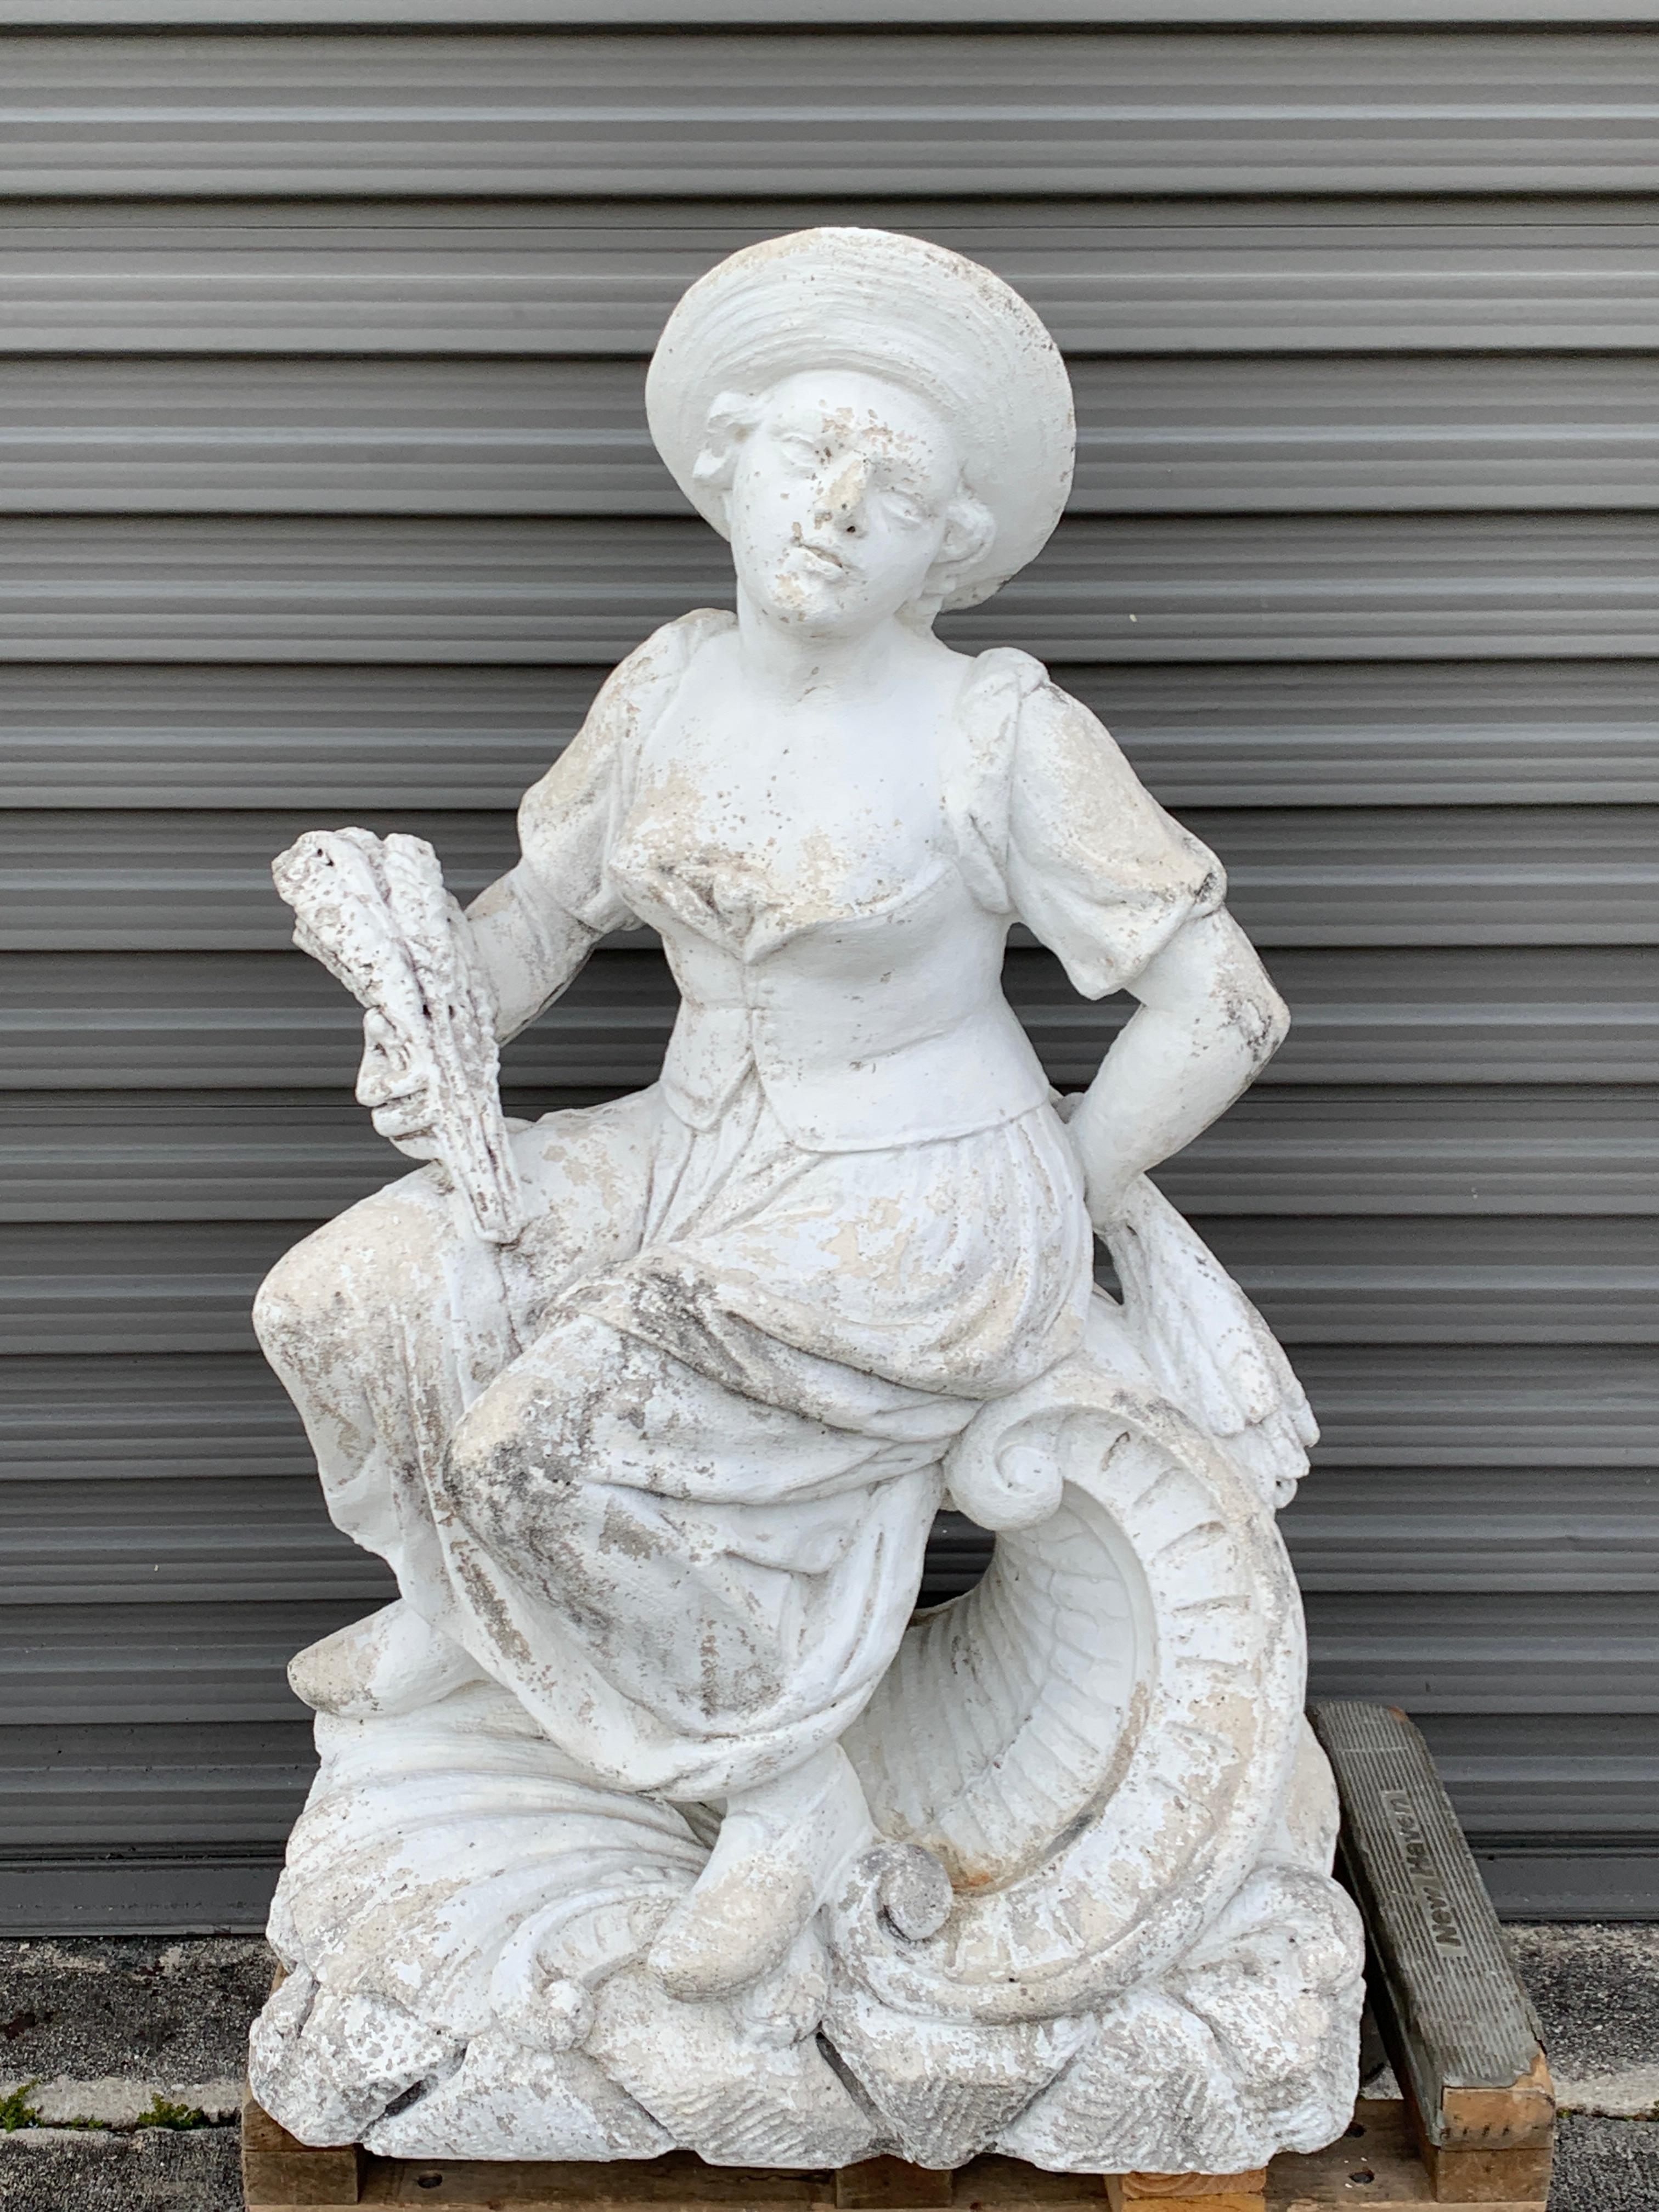 Vintage Neoclassical Cast Stone Statue of 'Harvest' on Pedestal Base
This is a substantial sculpture in two parts, the 17th century dressed seated woman wearing a hat with bushels of wheat in both of her hands, polychromed white.
Pedestal measures